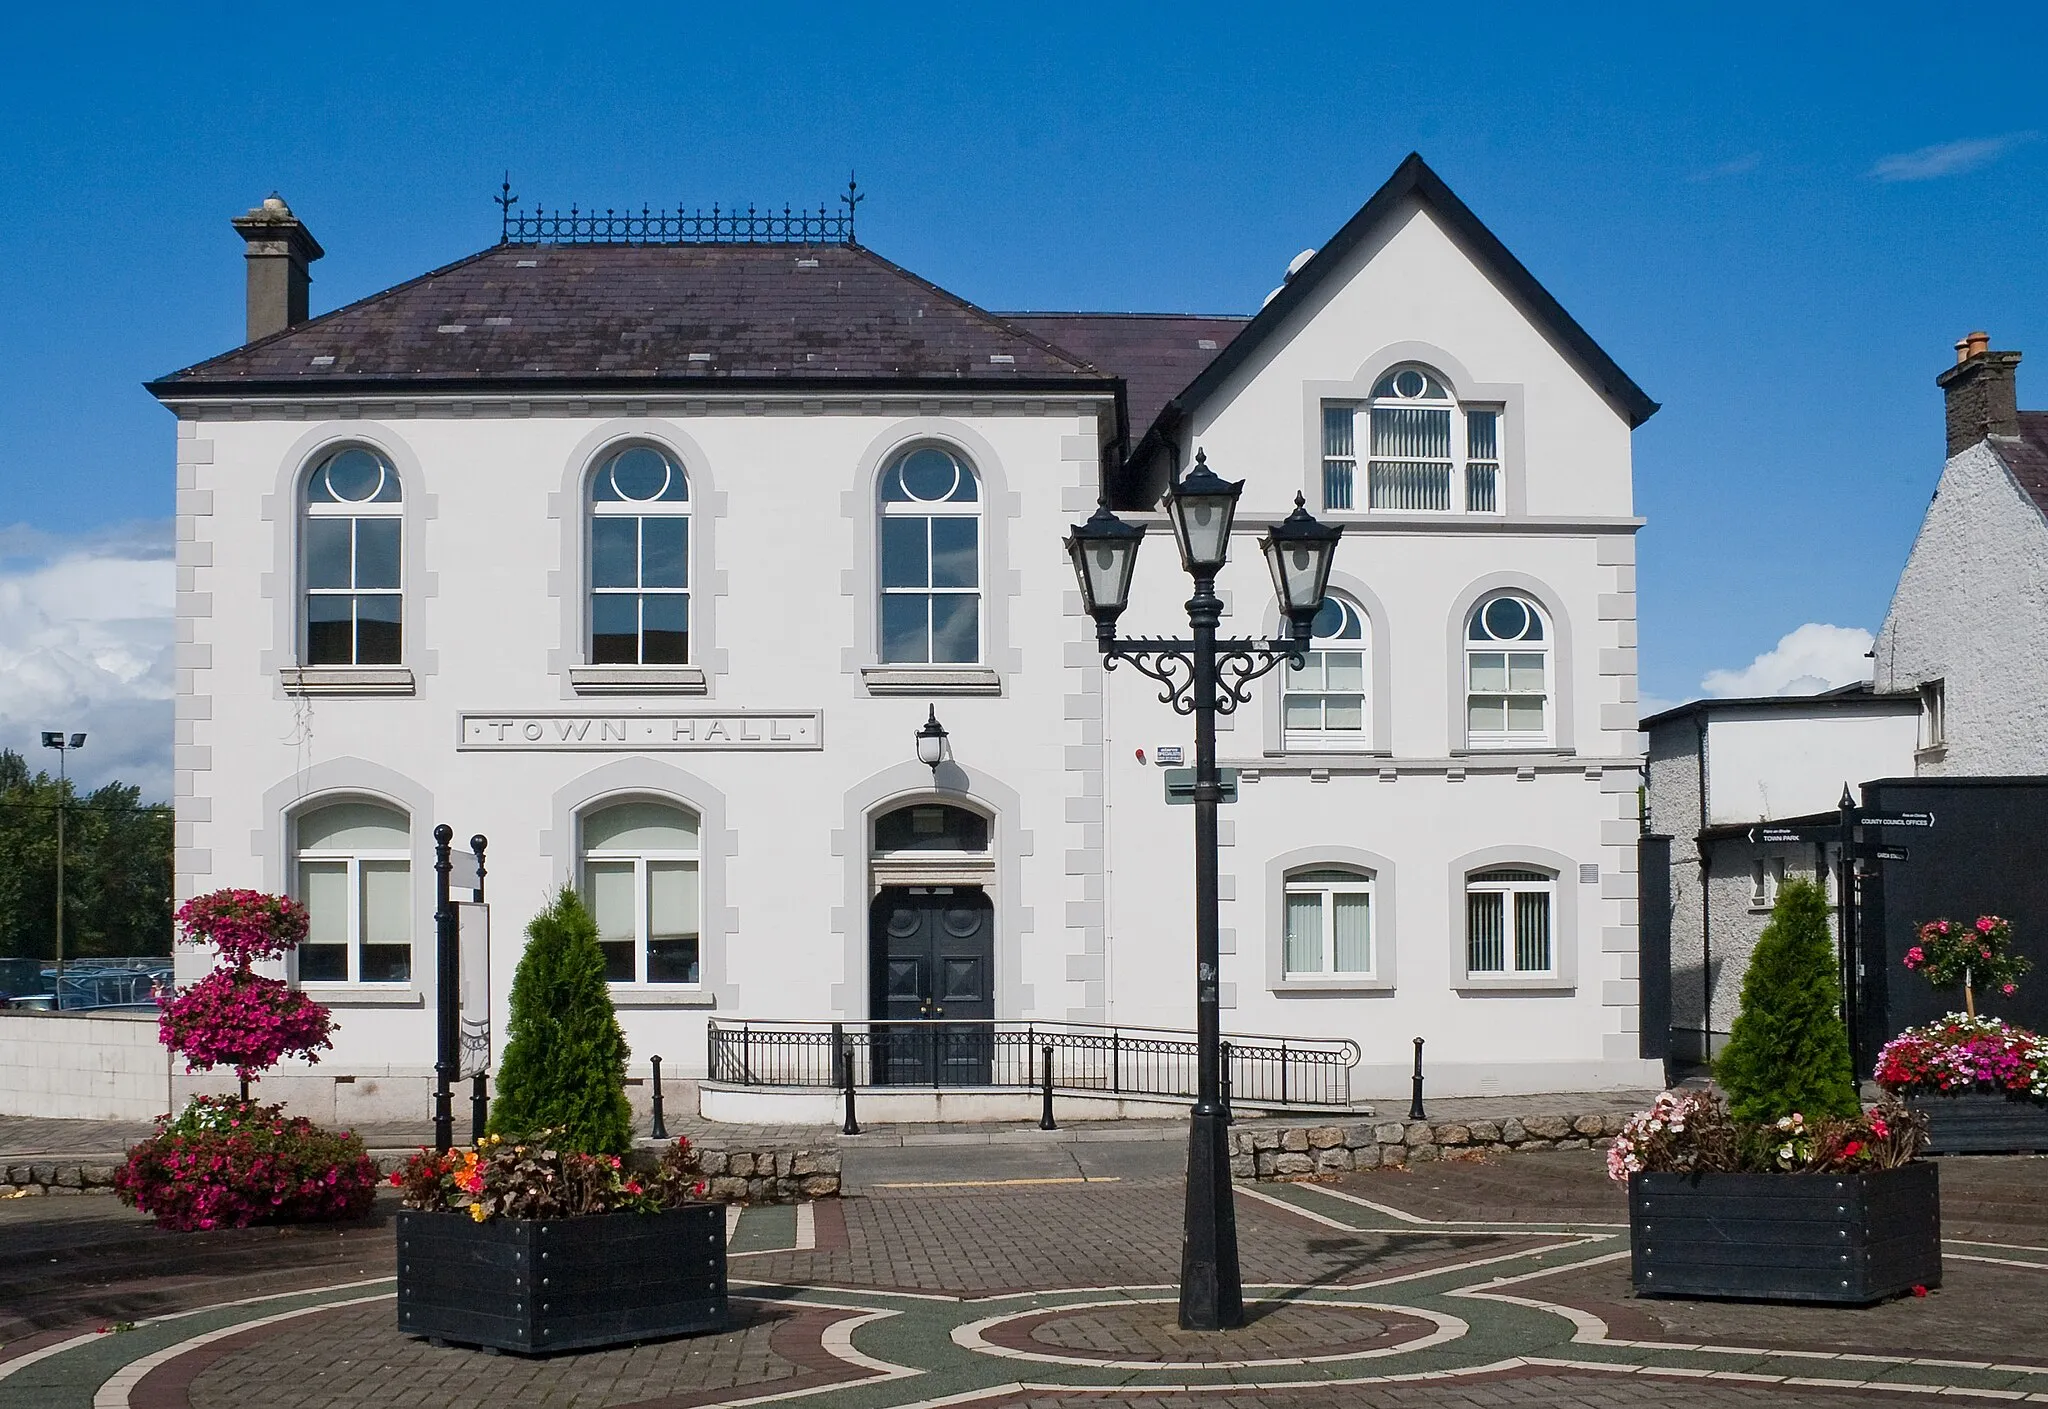 Photo showing: Carlow Town Hall, designed by the architect William Hague, contracted to Messrs Connolly & Son in January 1885, supervised by James Byrne (until July 1885) and Mr. Mullins (beginning from August 1885), opened on 30 March 1886, and refurbished in 2005. (See here for a history of this building.)